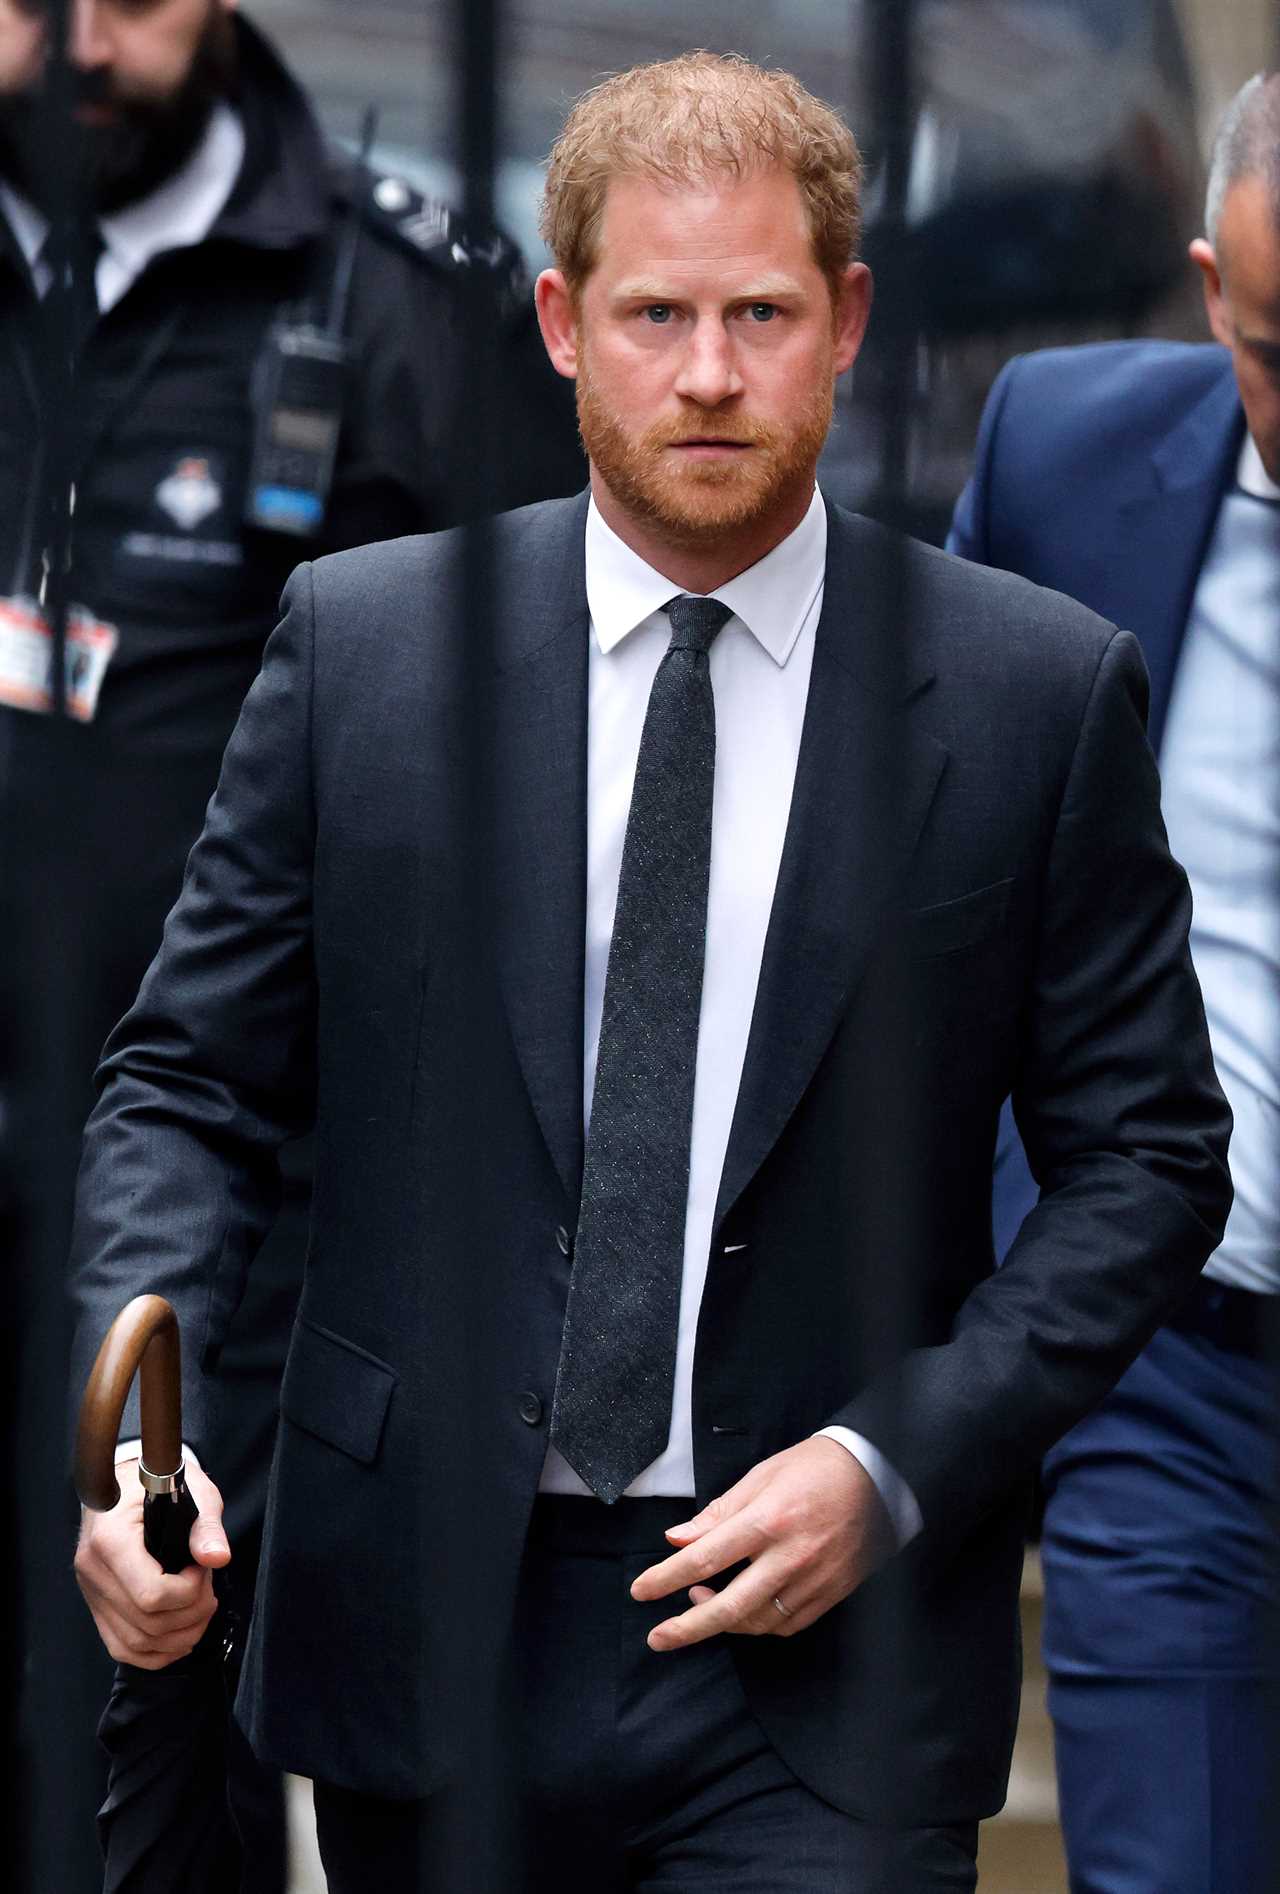 Prince Harry 'may have lied' in memoir Spare, claims royal photographer